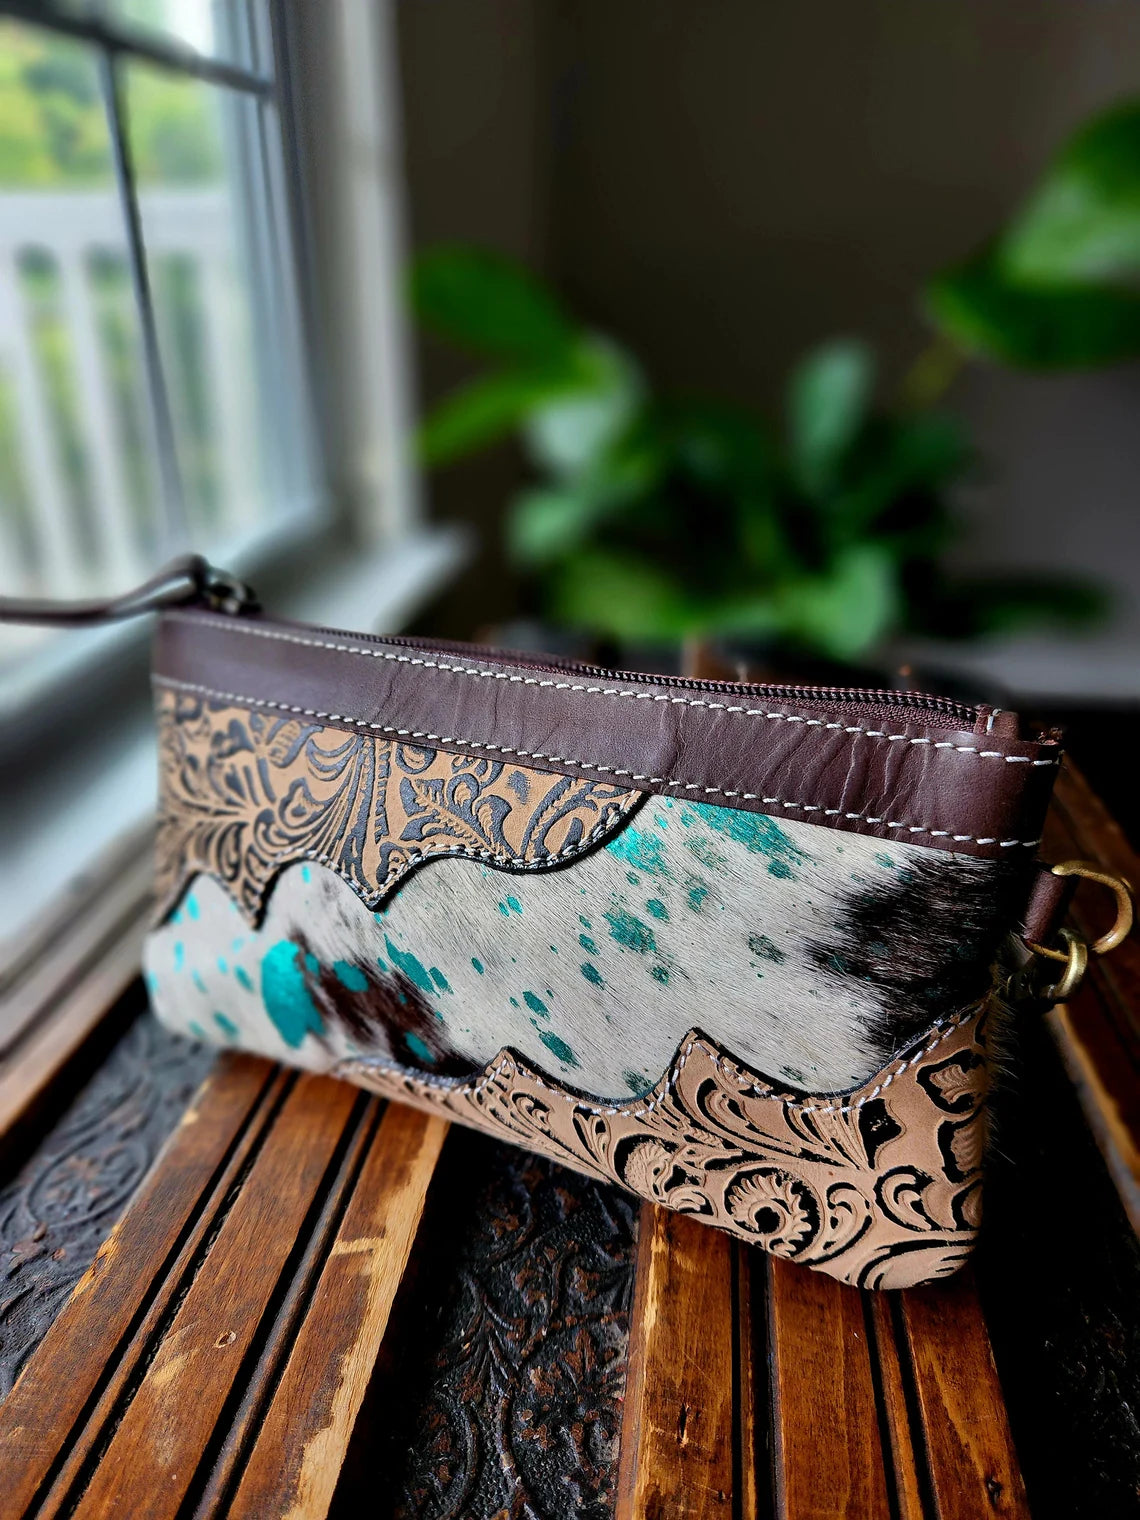 Tooled Leather and Cowhide wristlets